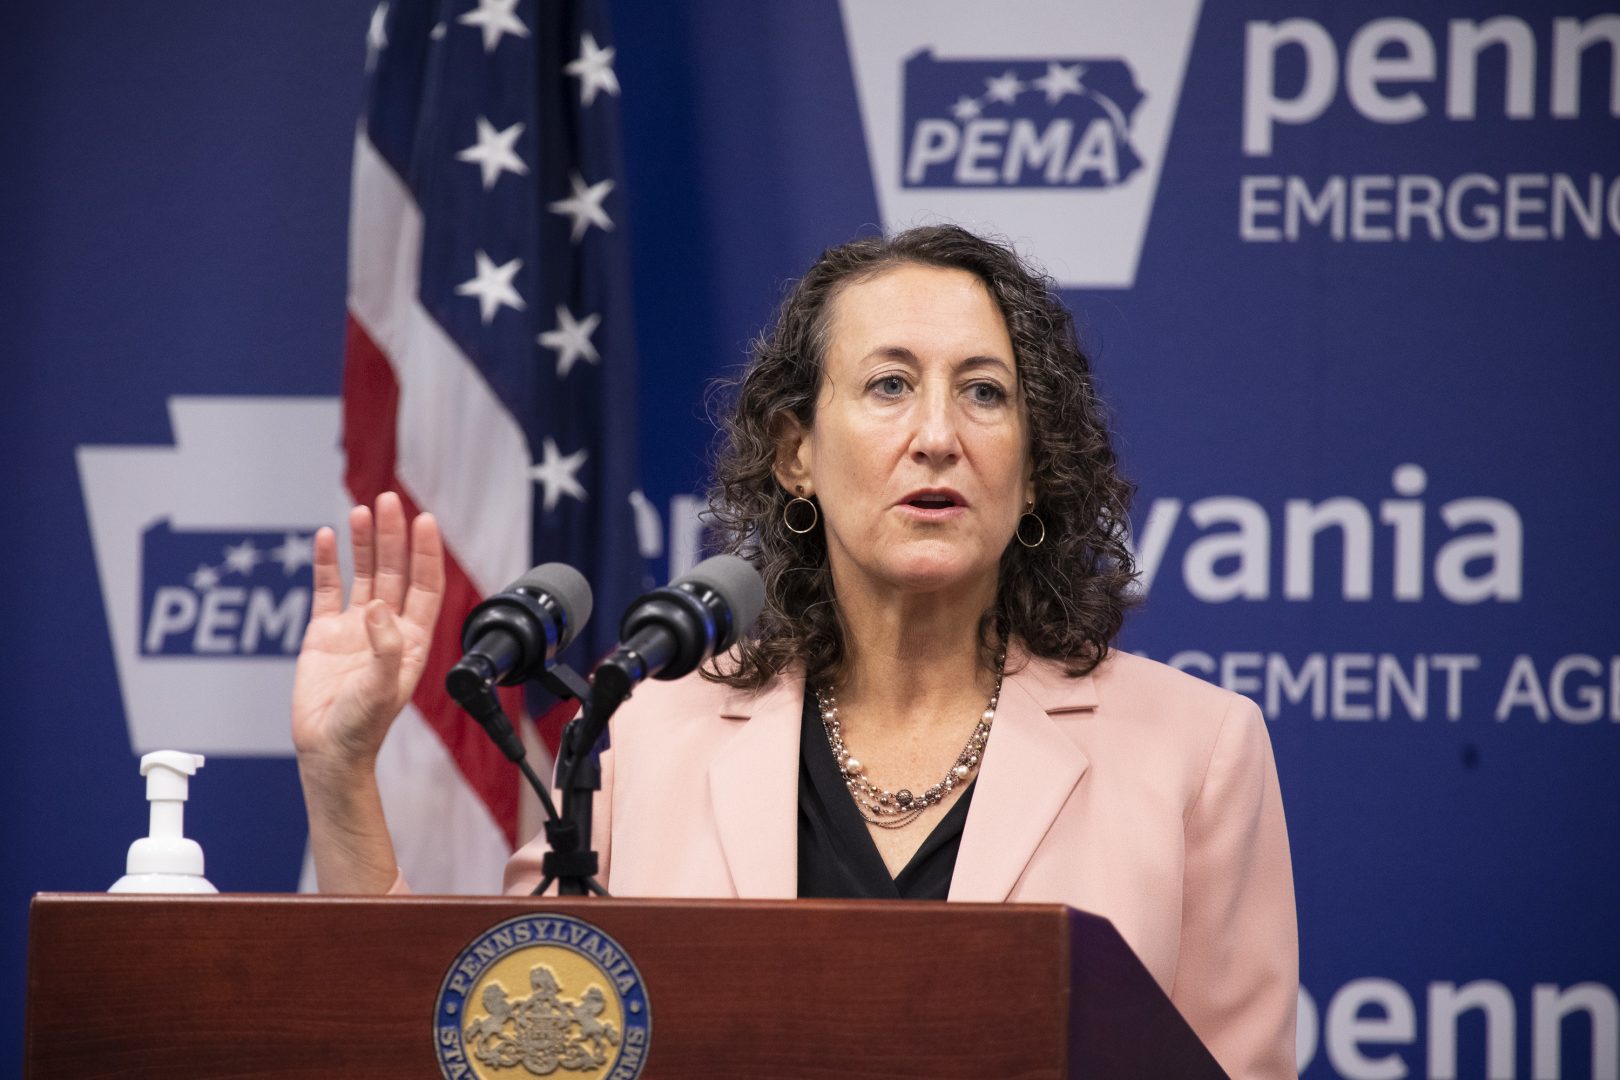 Pennsylvania Secretary of State Kathy Boockvar speaking to the press on Oct. 27, 2020. Governor Tom Wolf and Secretary of State Kathy Boockvar reminded Pennsylvanians that today is the deadline to apply for a mail-in or absentee ballot for the Nov. 3 election.